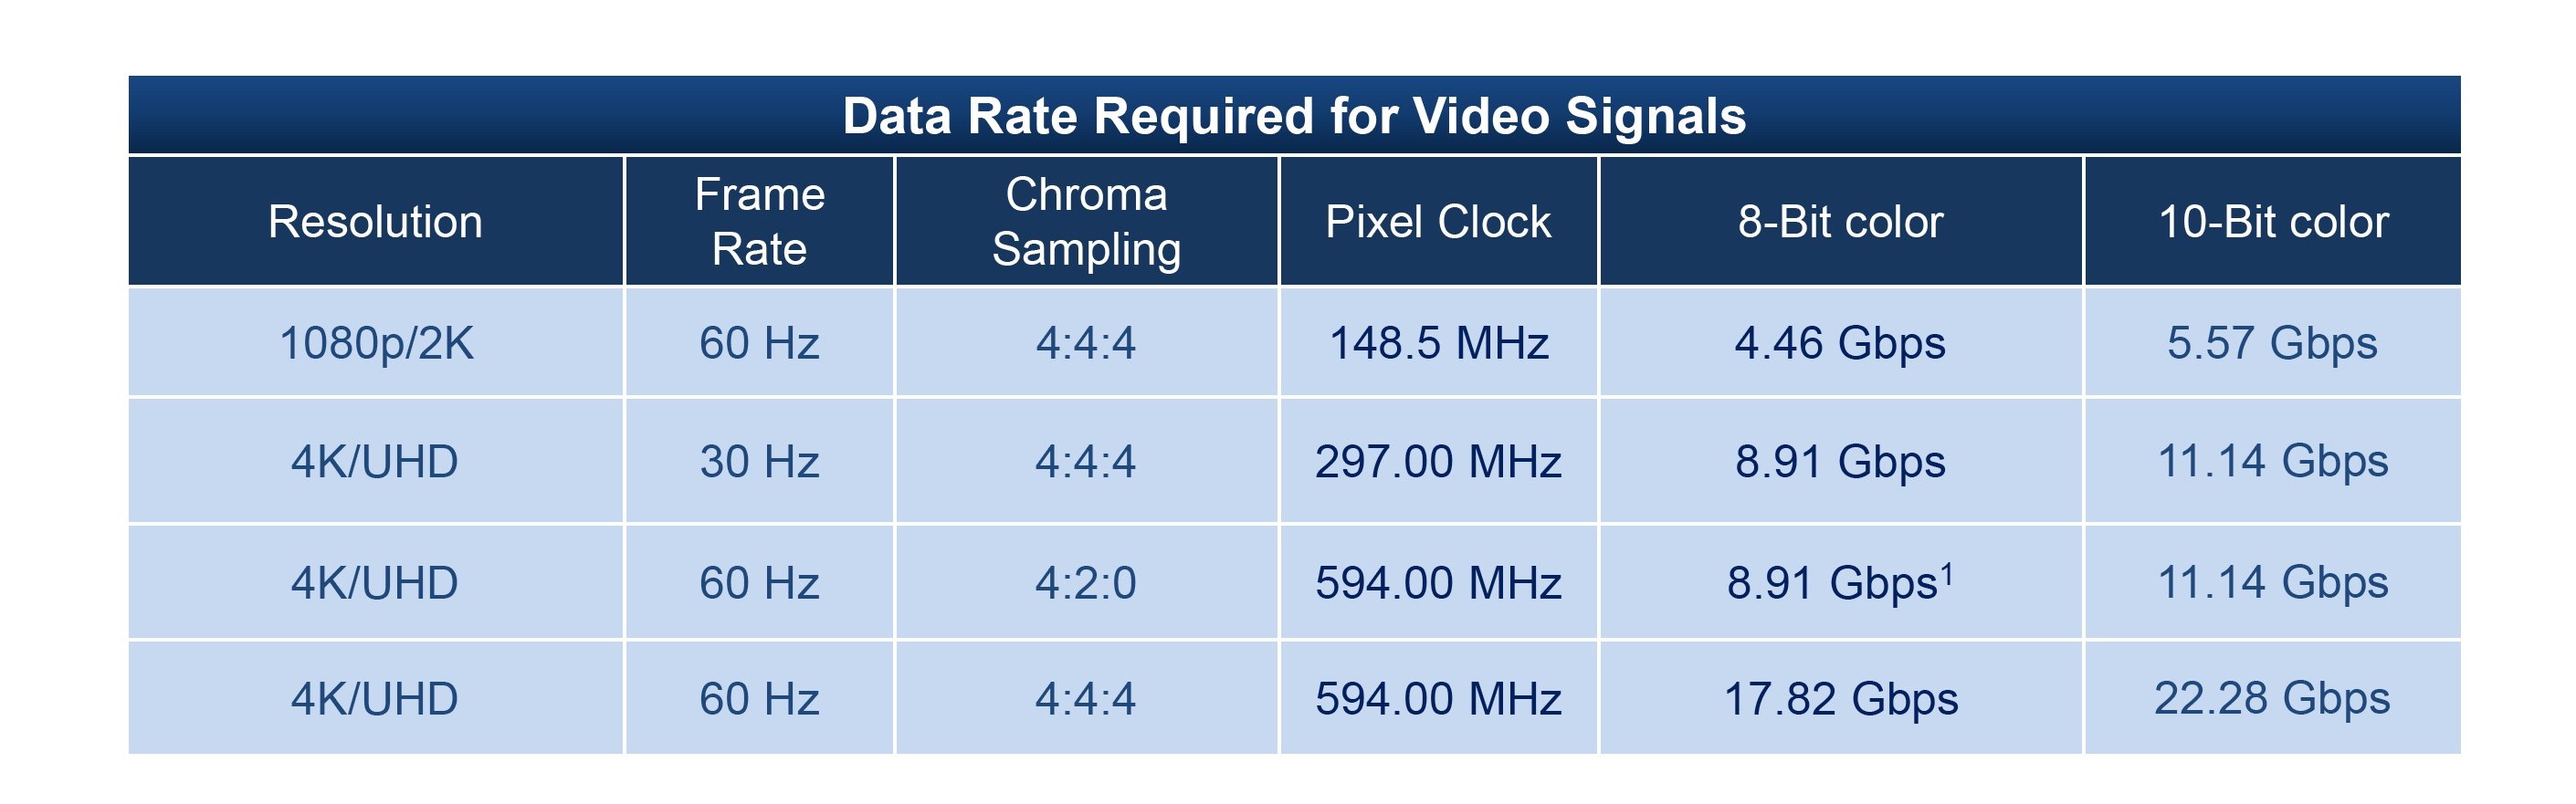 Data rate video signals